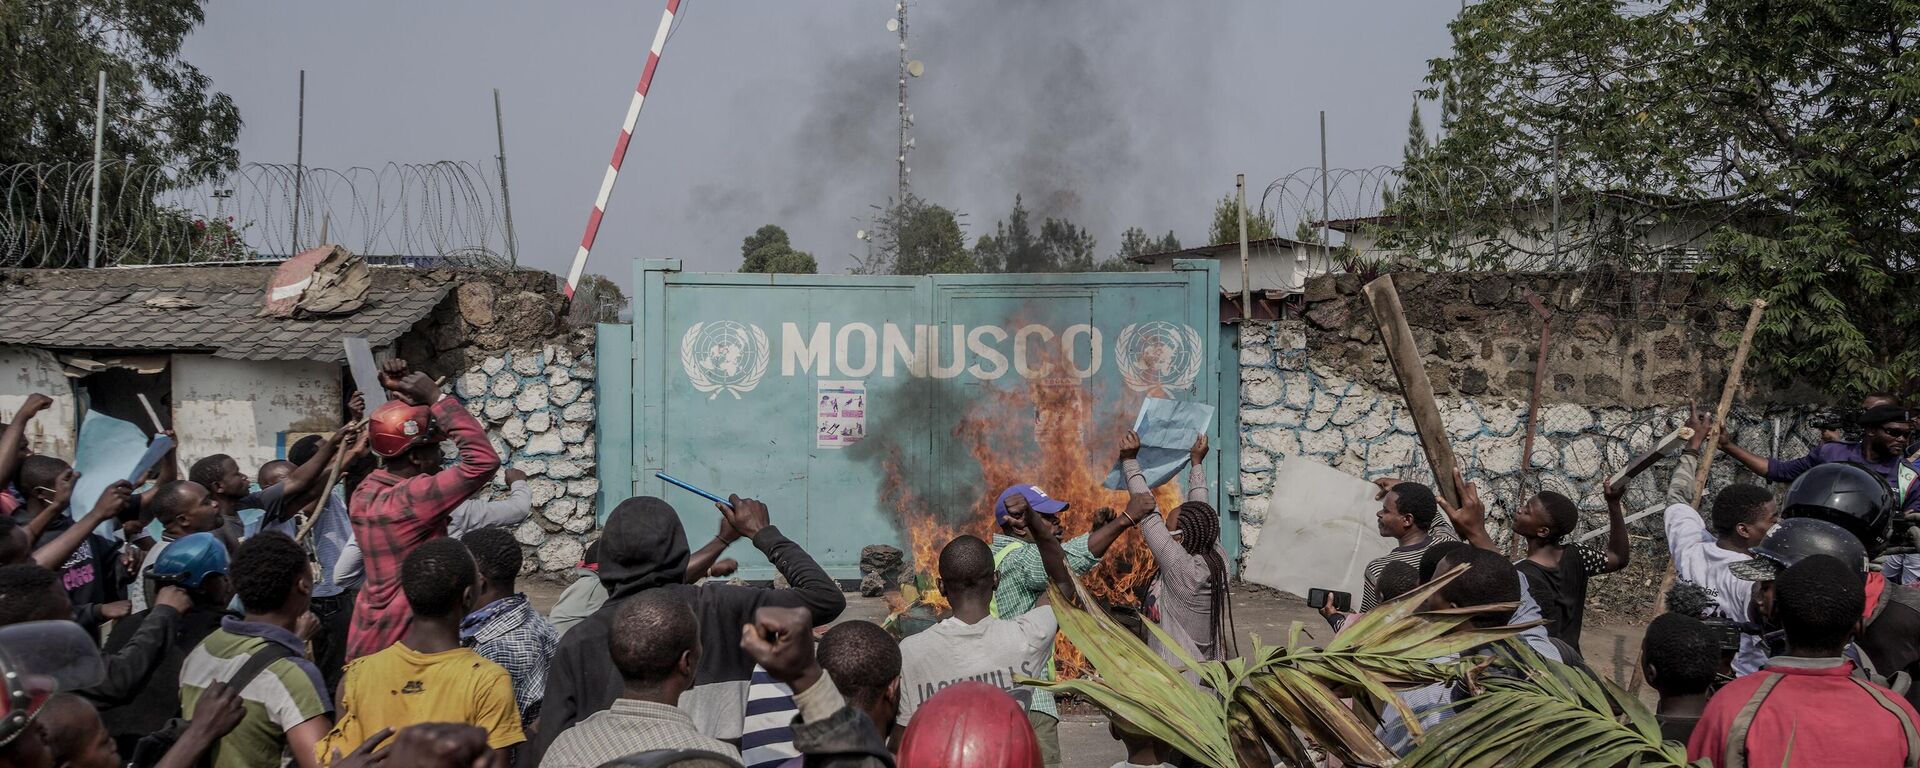 Protesters set fire in front of United Nations Mission for the Stabilisation of Congo (MONUSCO) Headquarters in Goma, on July 25, 2022. - Sputnik International, 1920, 25.07.2022